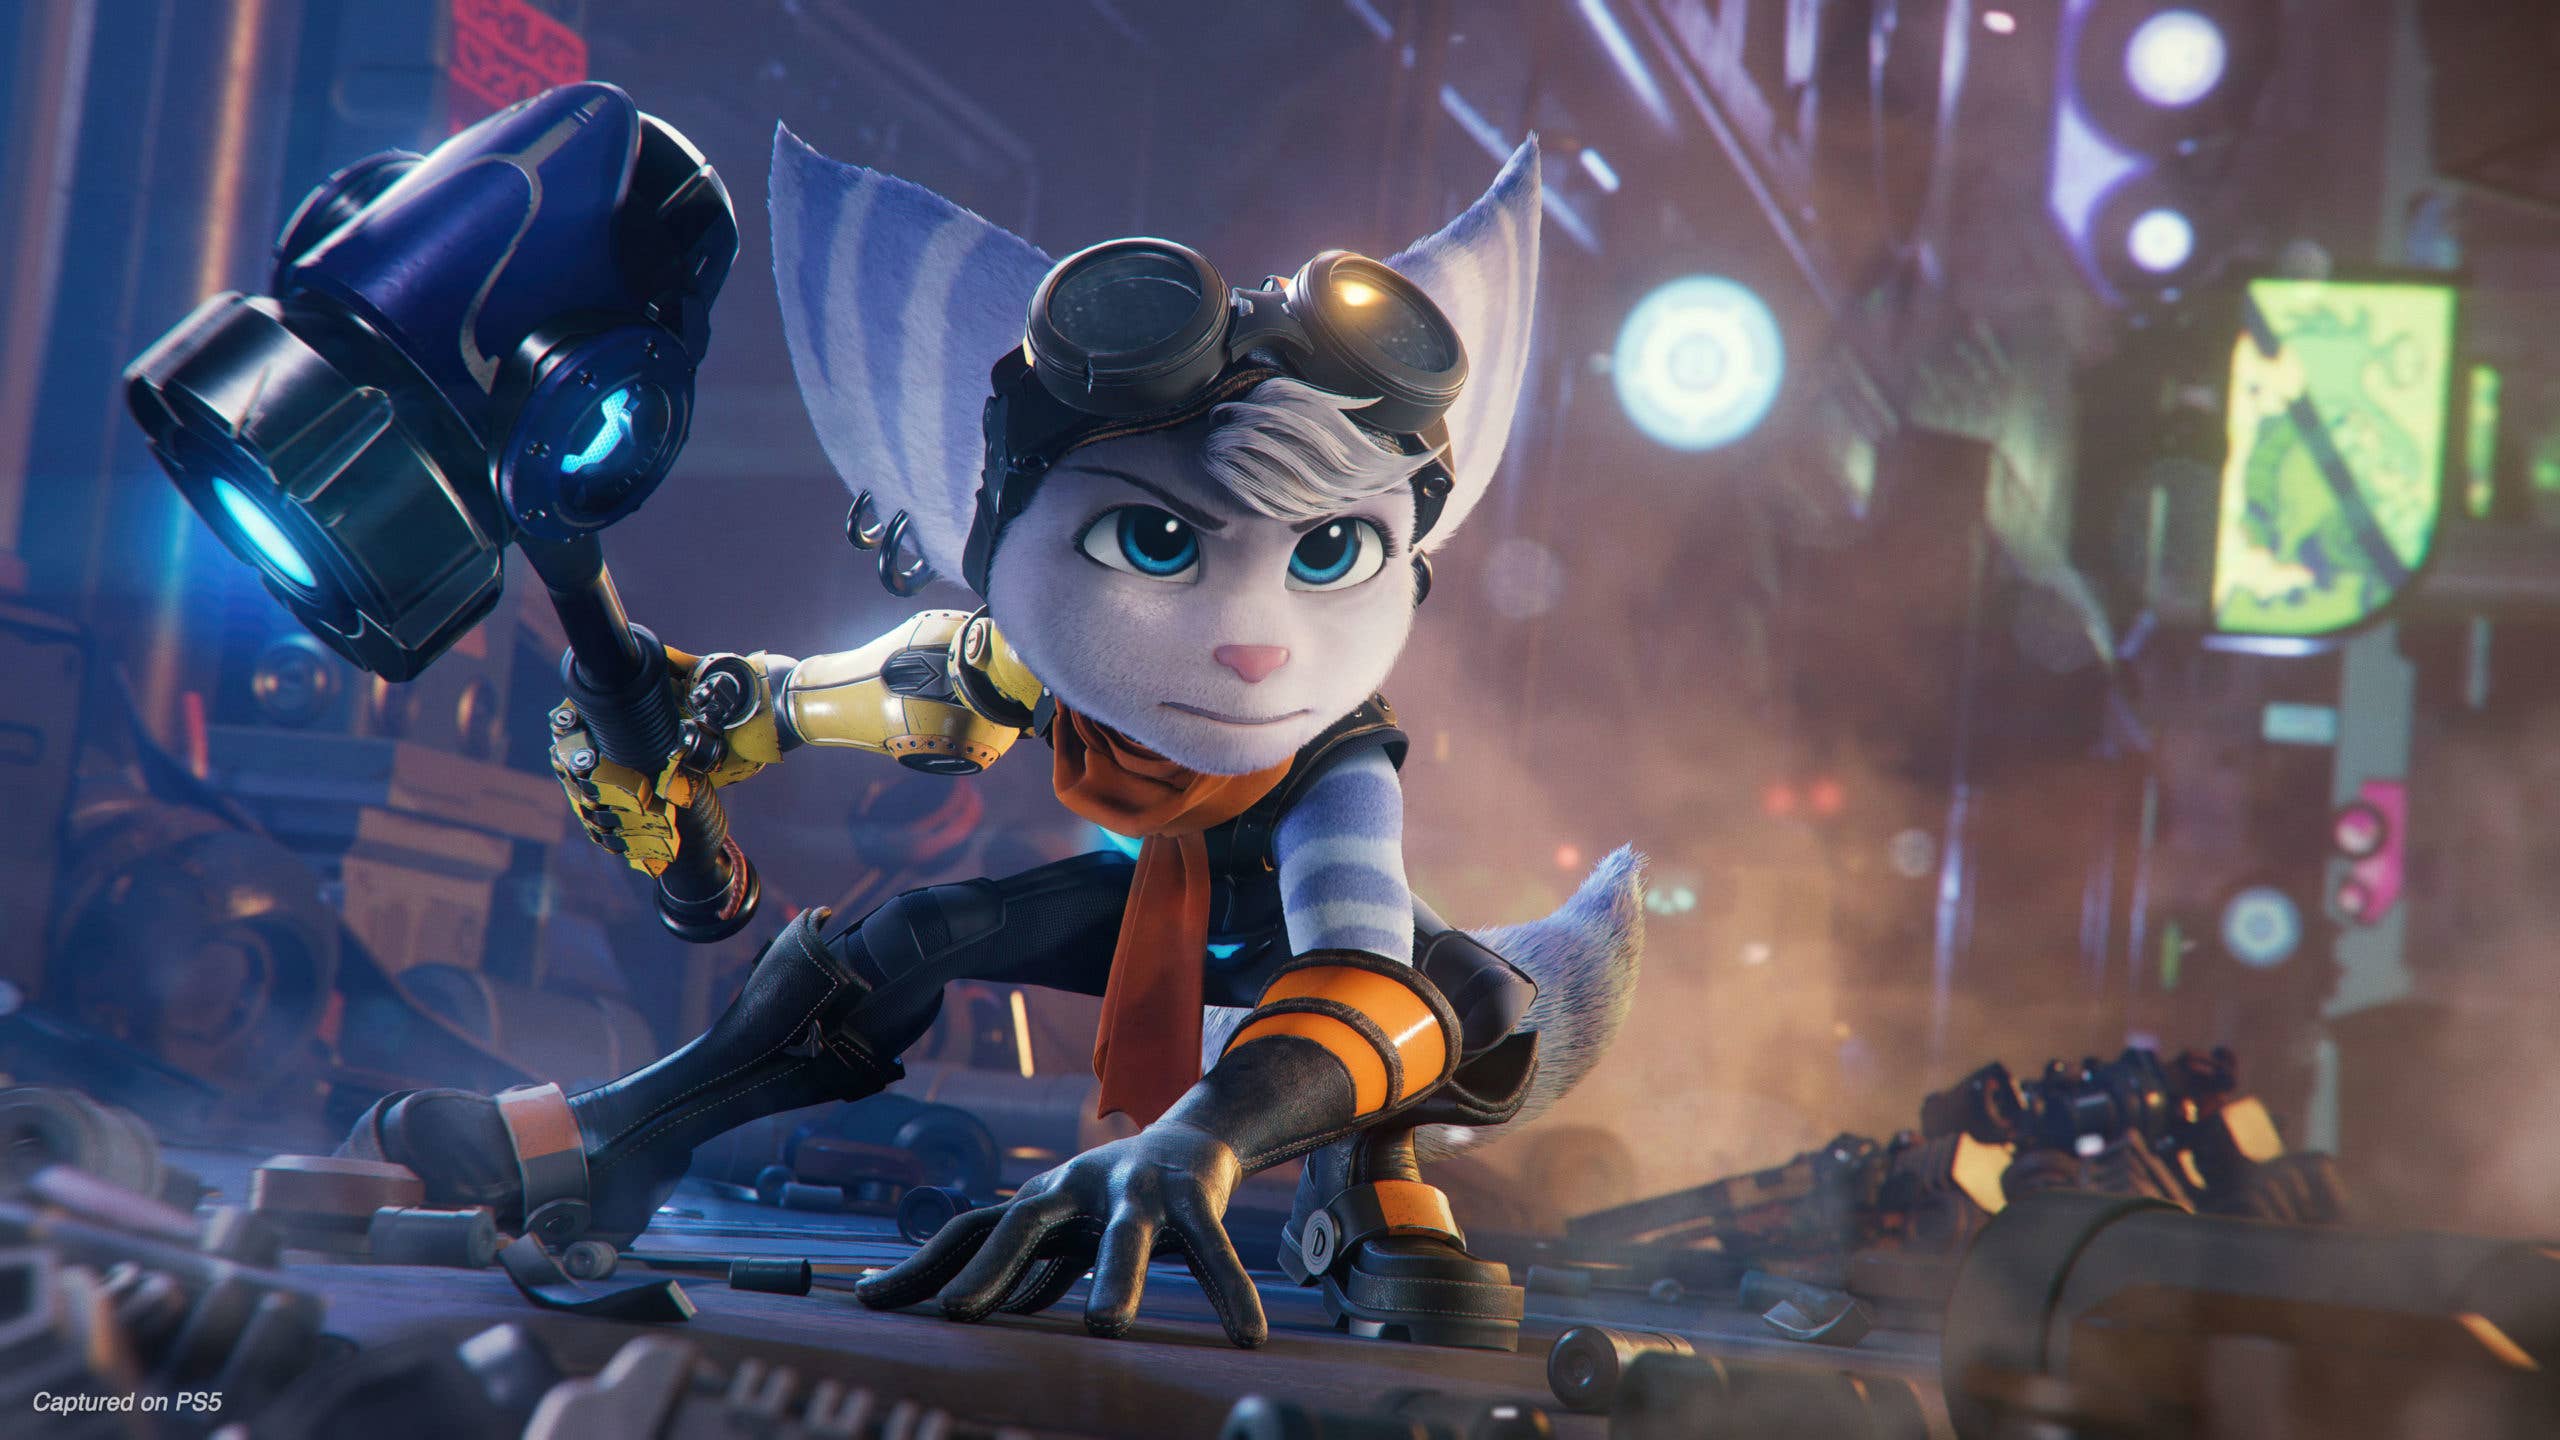 Ratchet and Clank Review - IGN